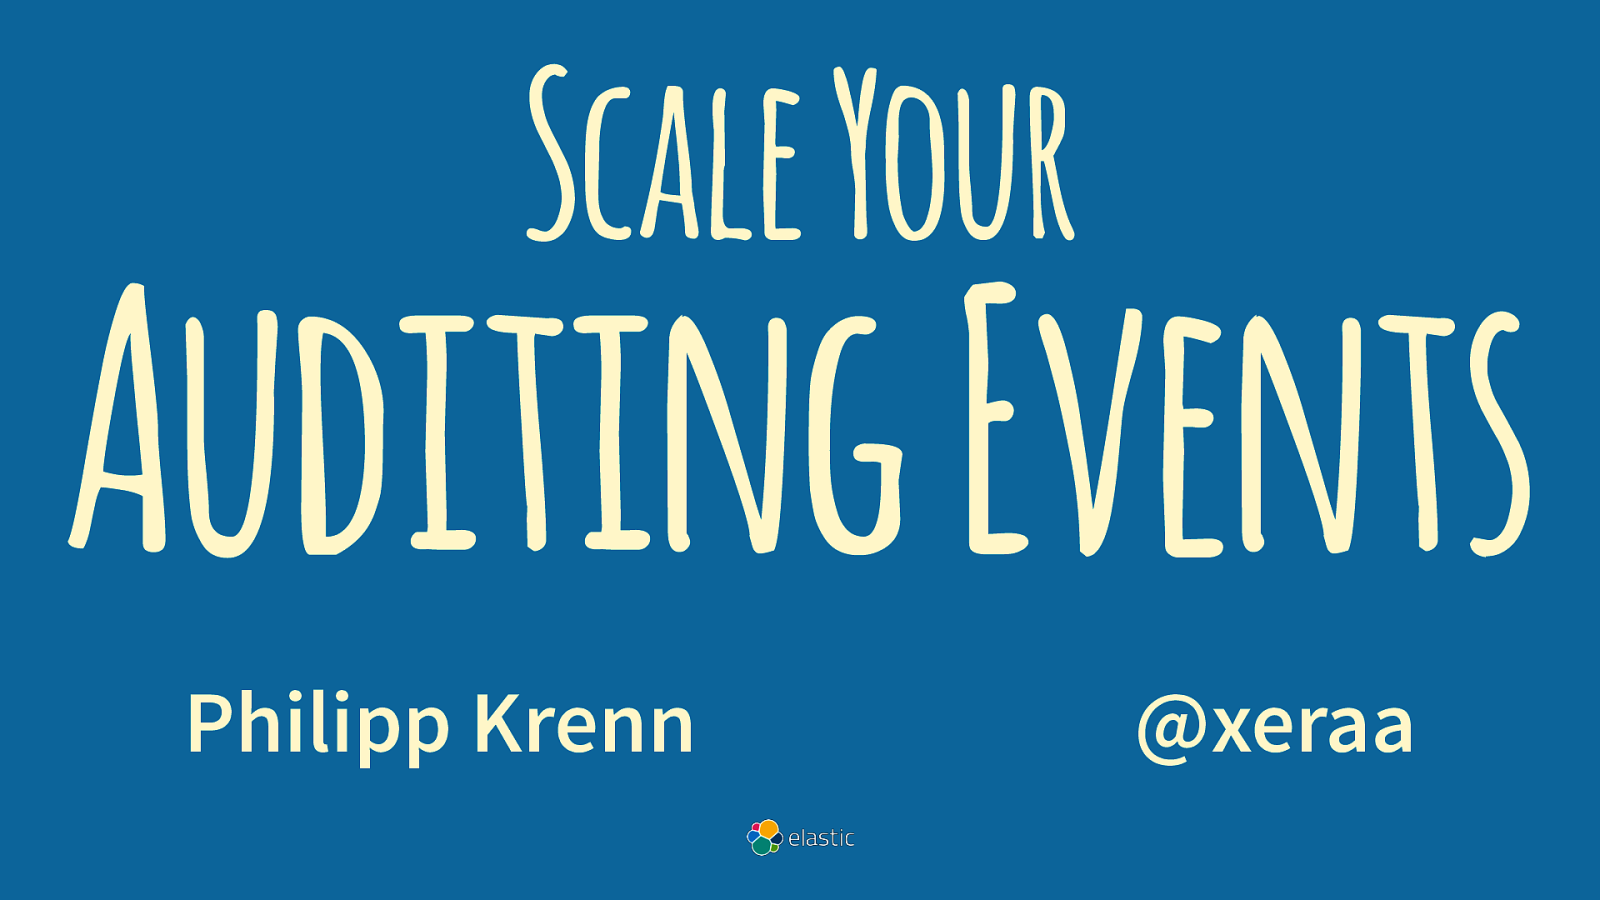 Scale Your Auditing Events